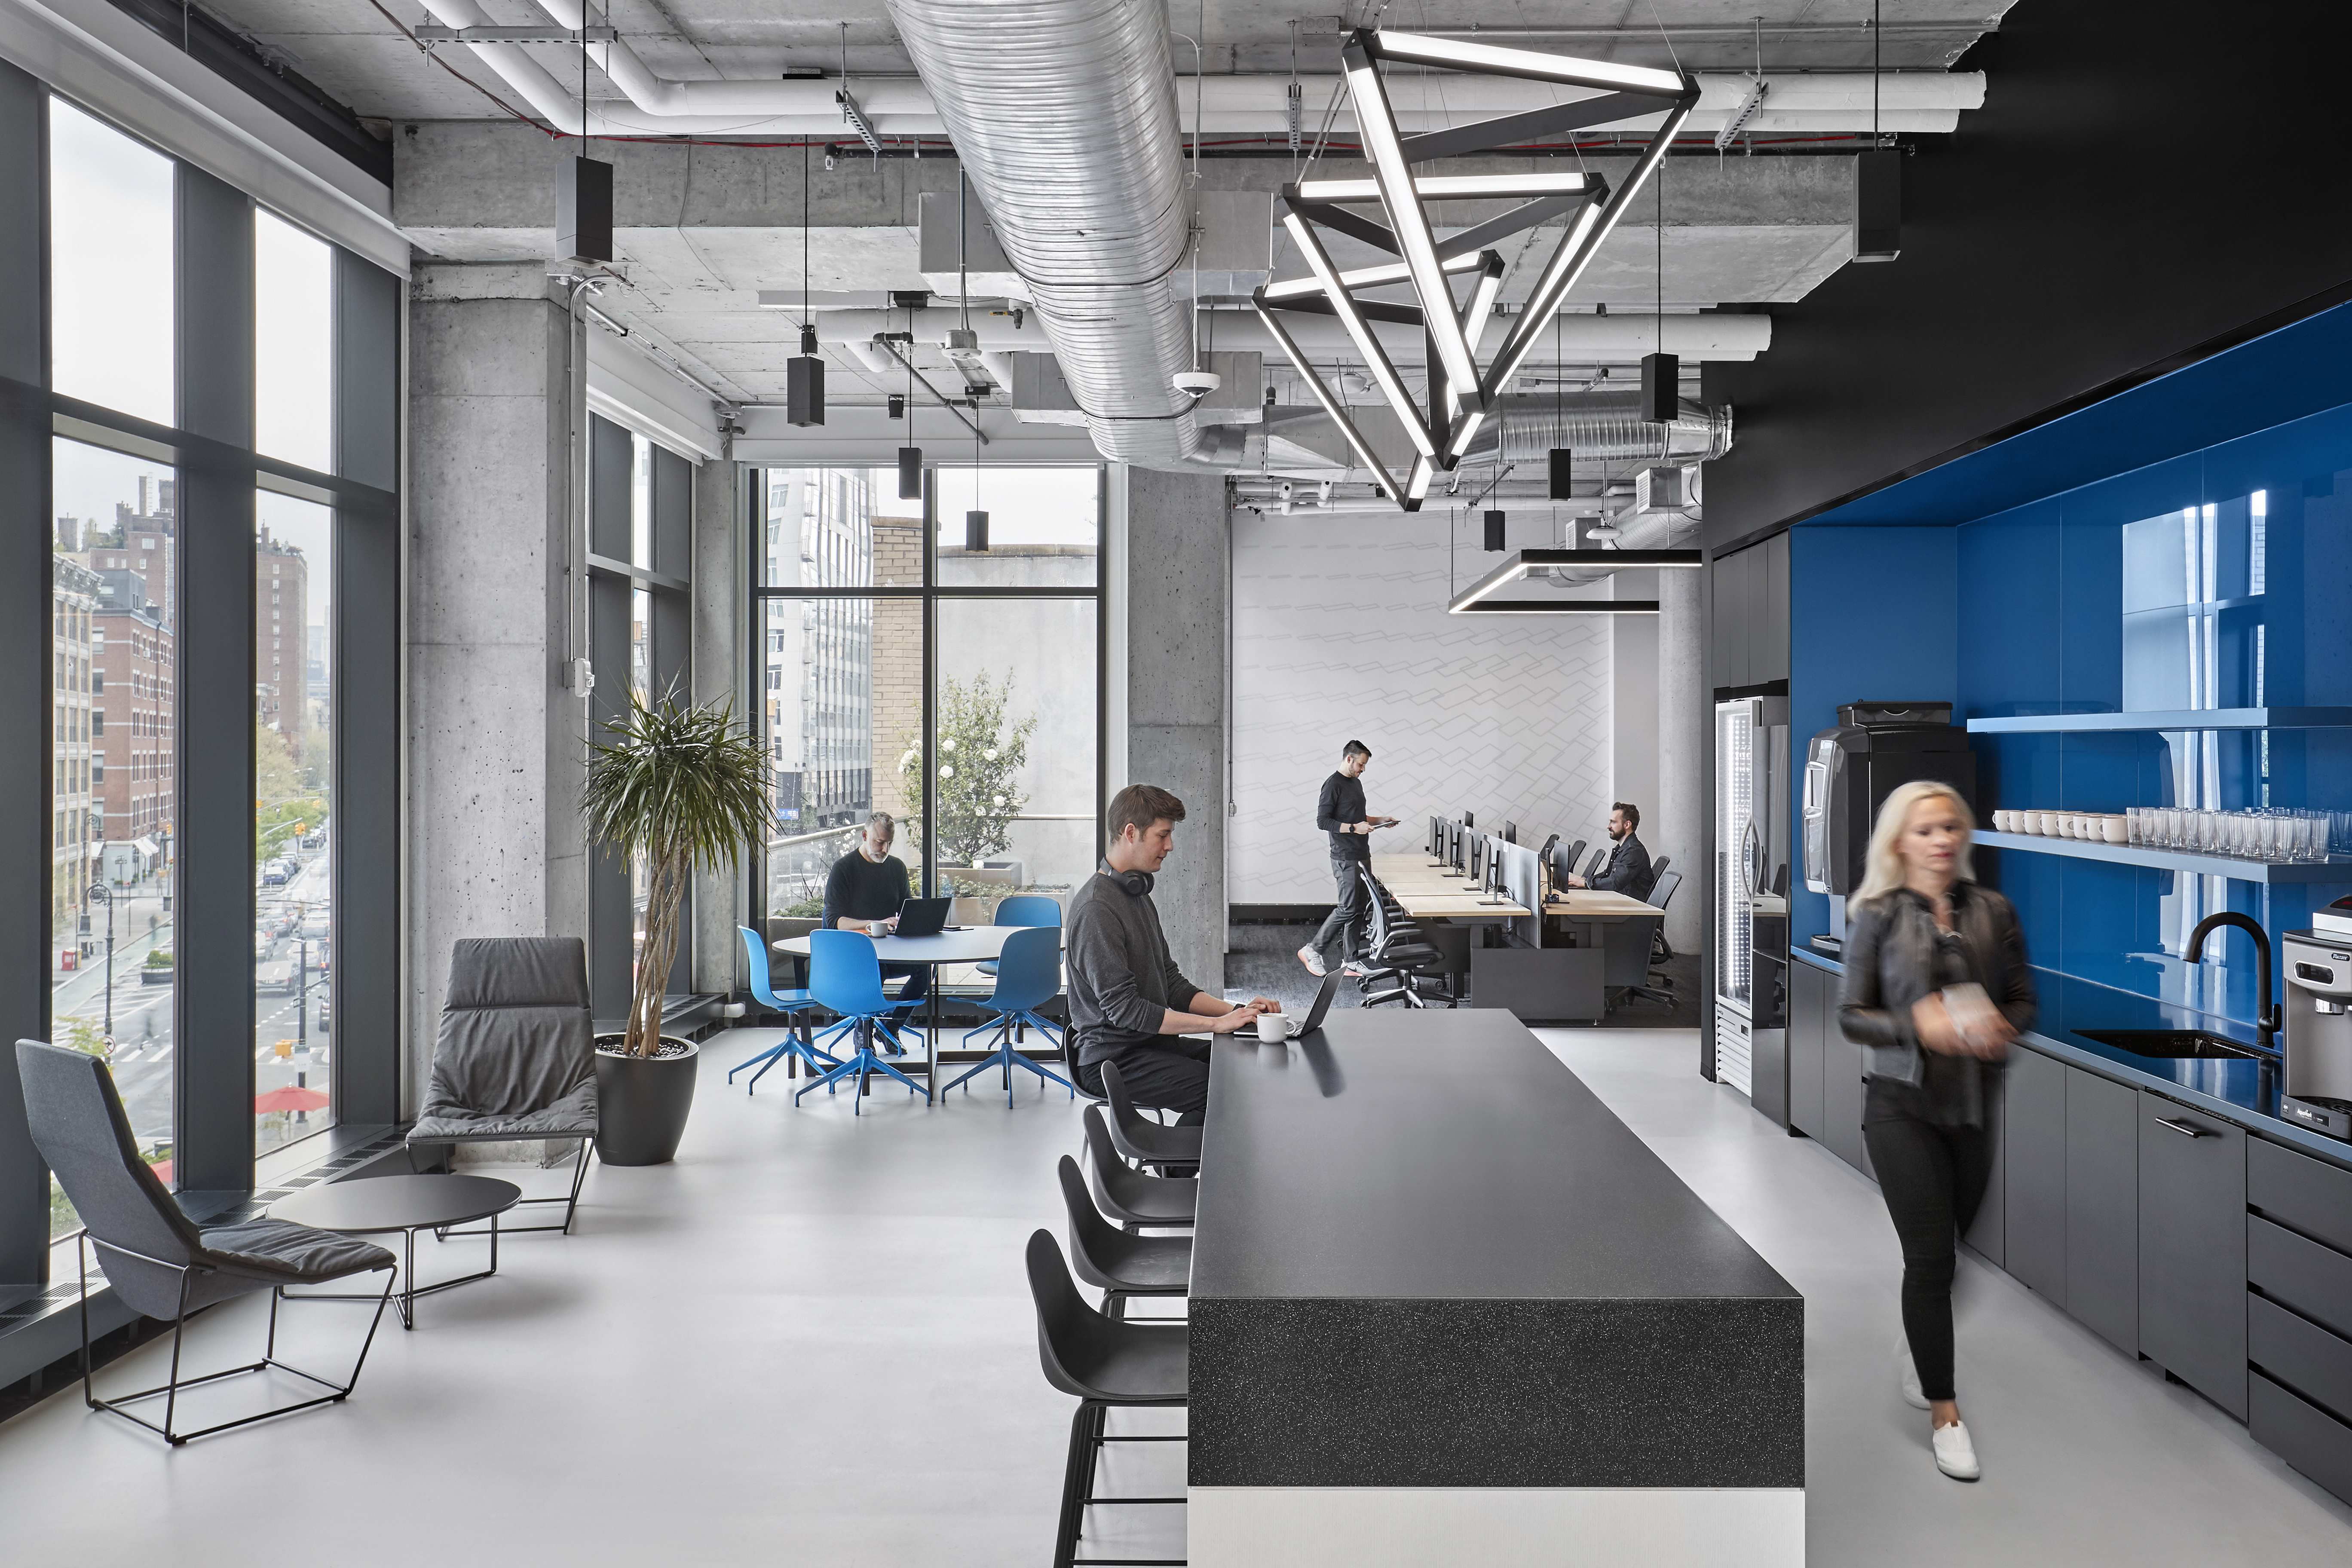 Team members in a common area of Yext's HQ